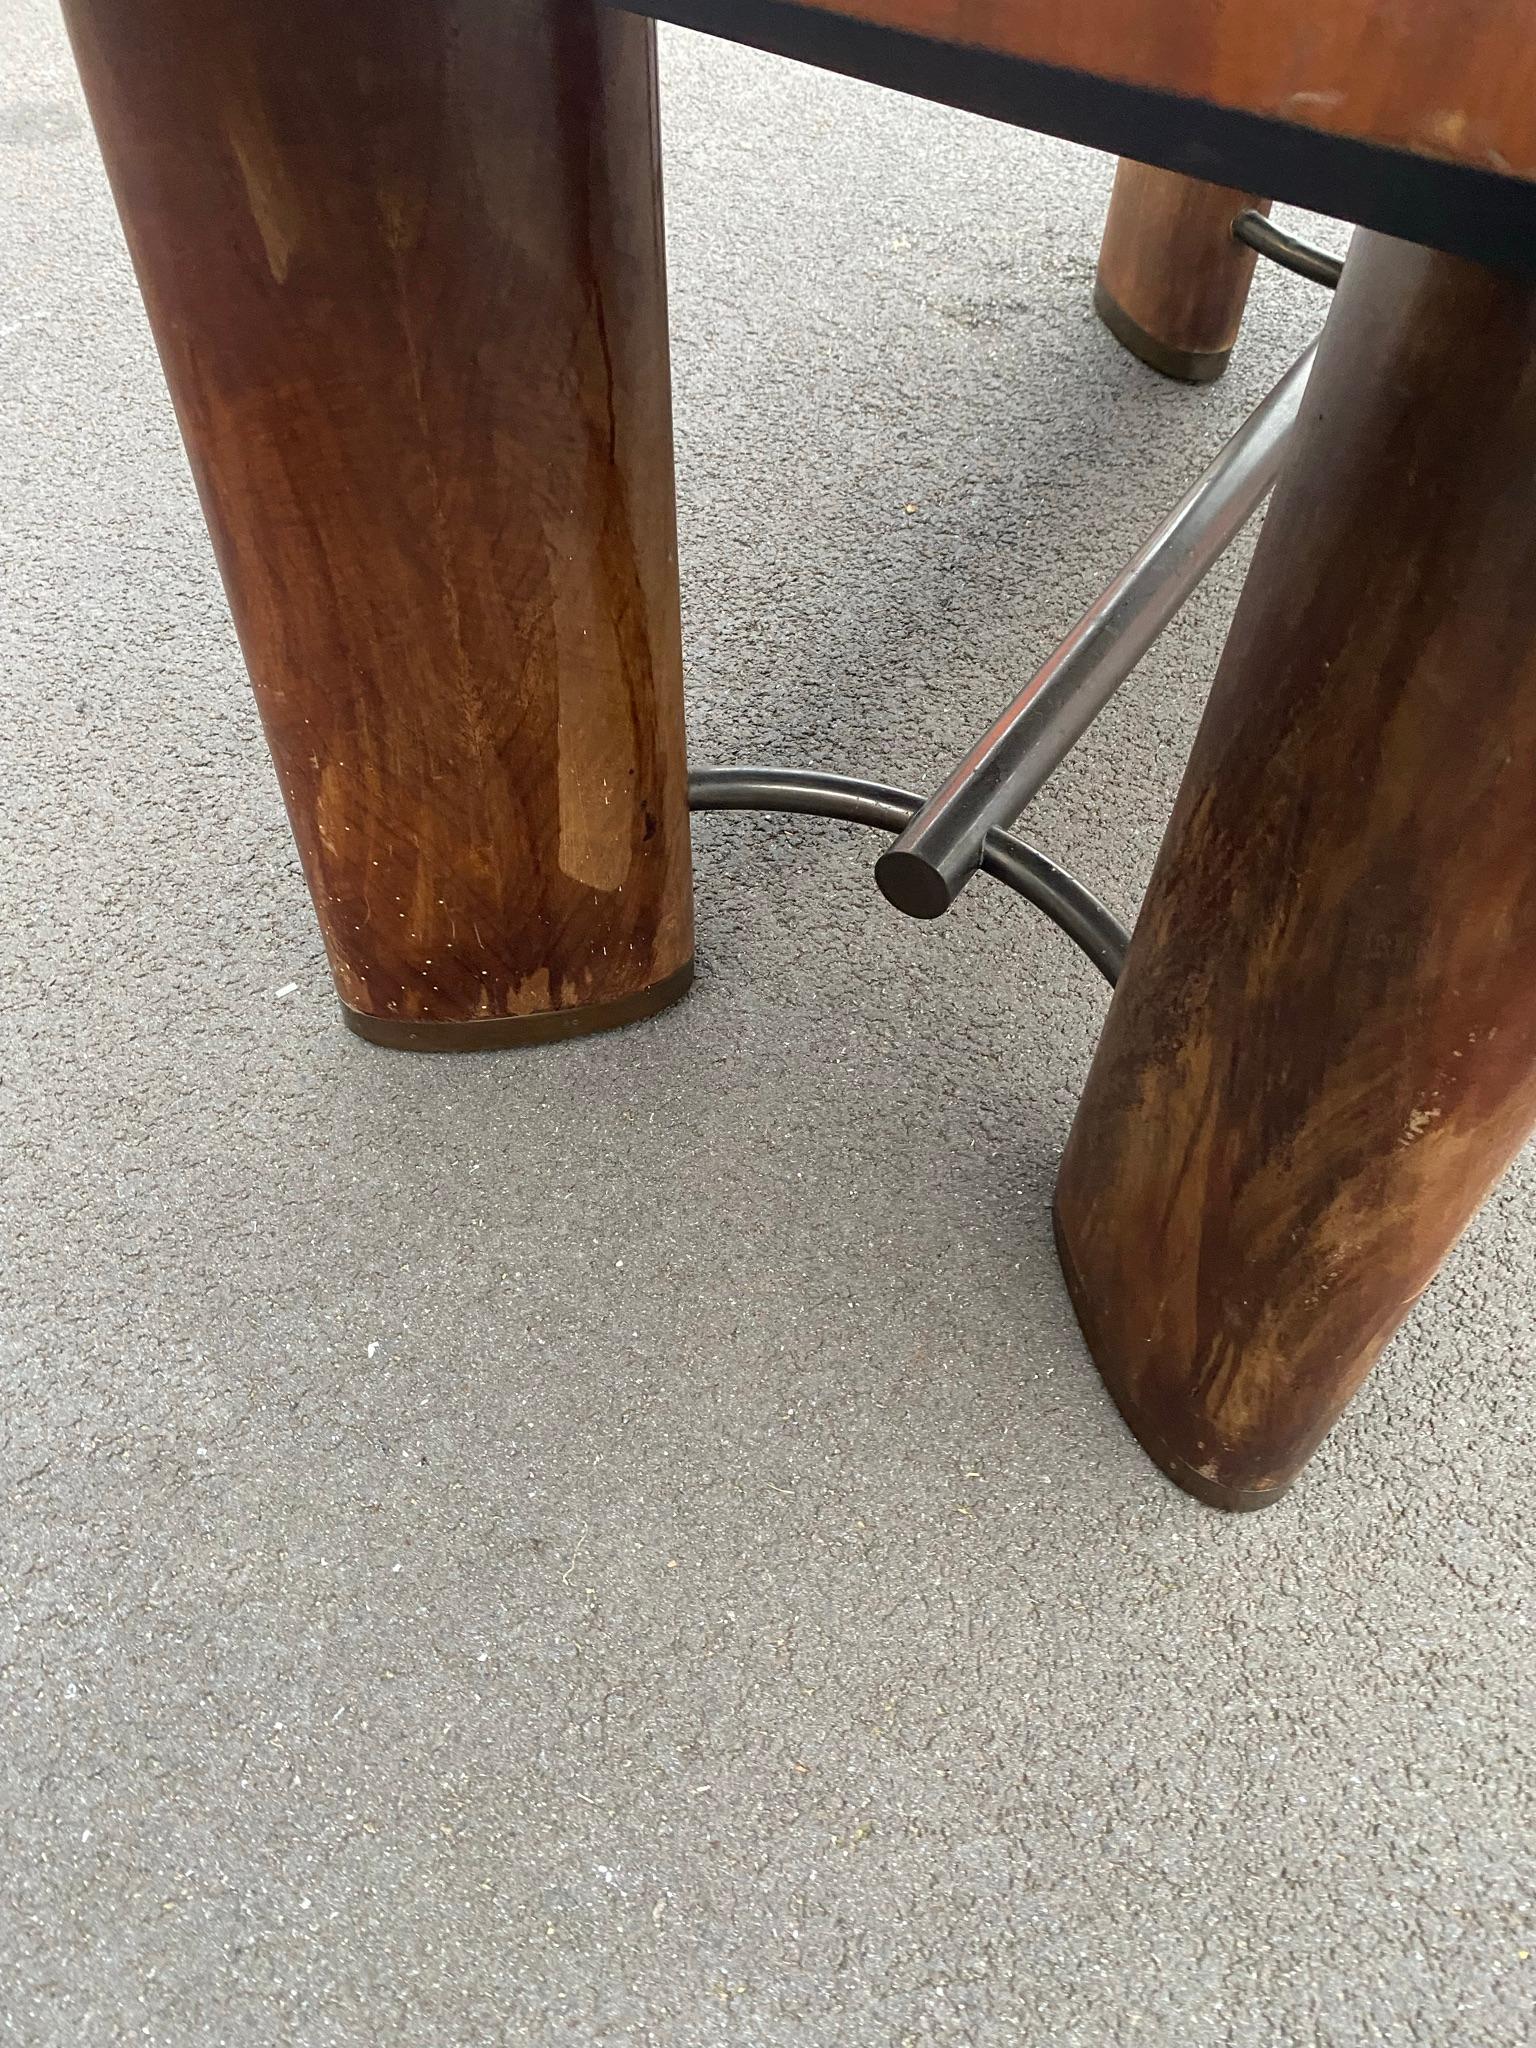 Modernist Art Deco Desk or Table in Walnut, Metal Spacer and Shoe, circa 1930 For Sale 3